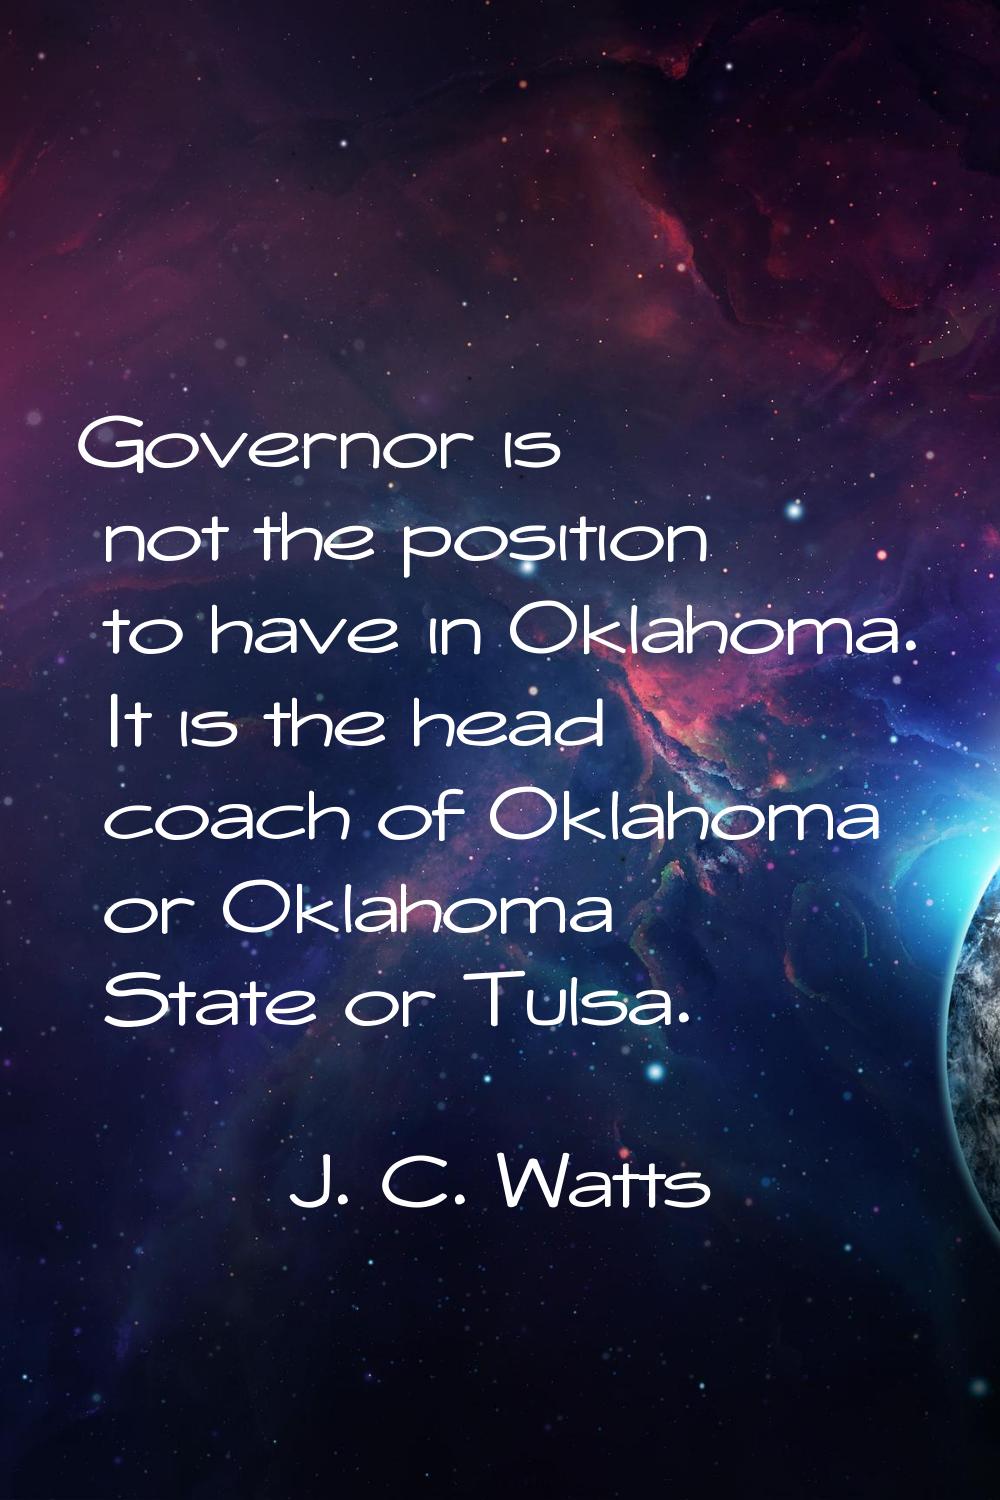 Governor is not the position to have in Oklahoma. It is the head coach of Oklahoma or Oklahoma Stat